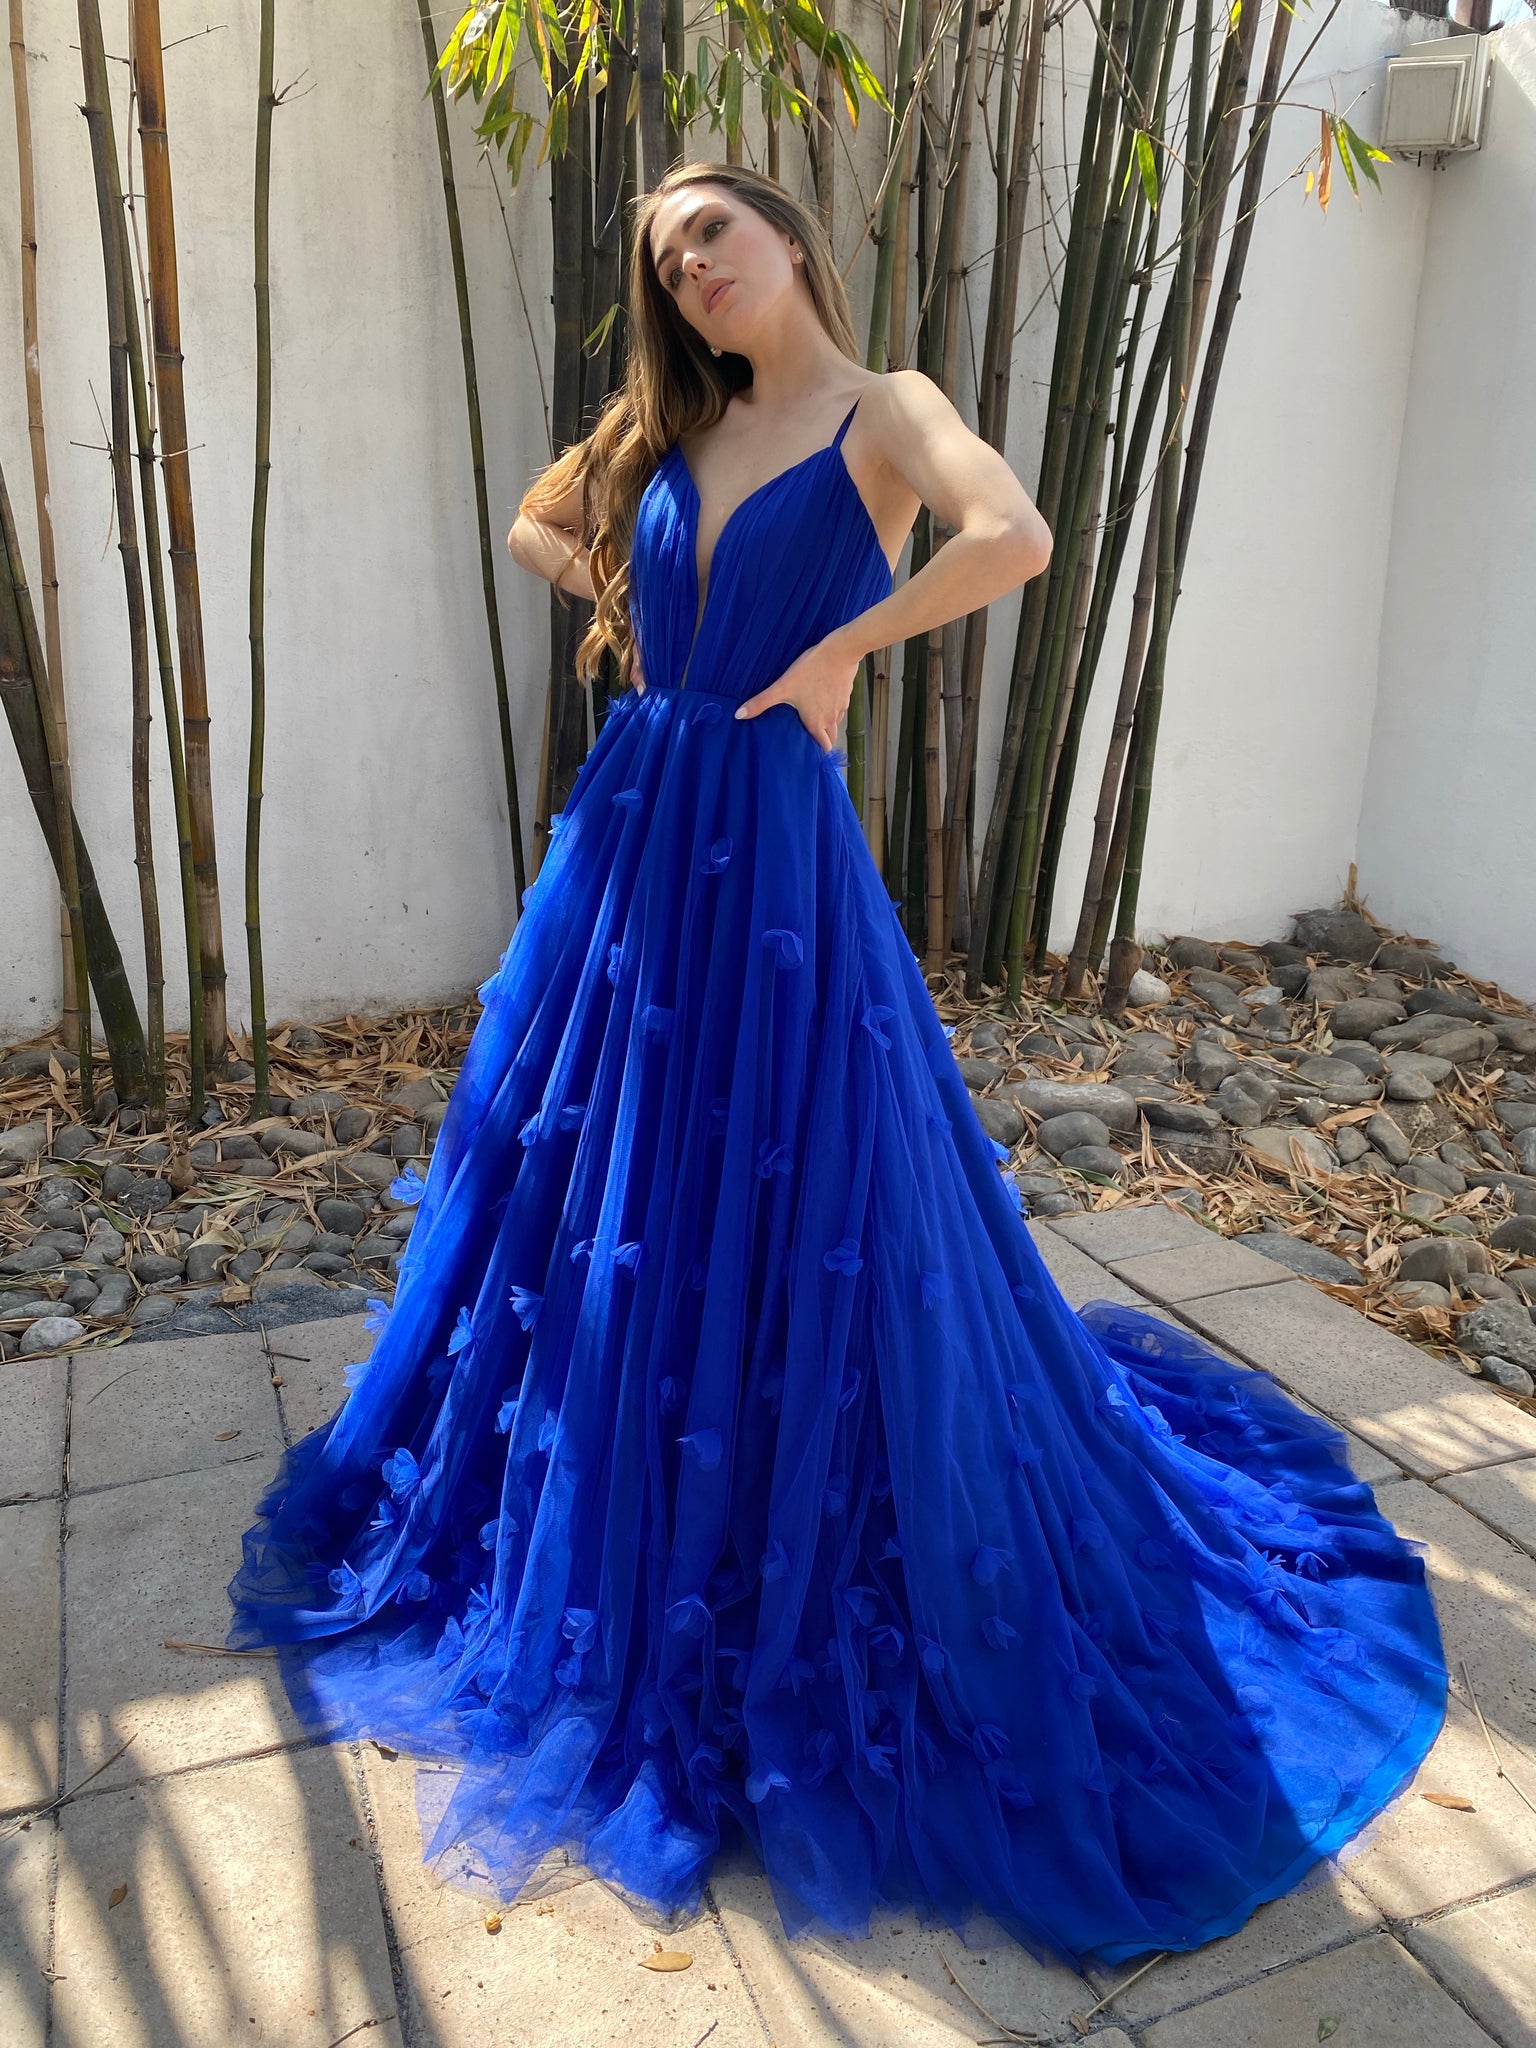 Blue floral tulle gown